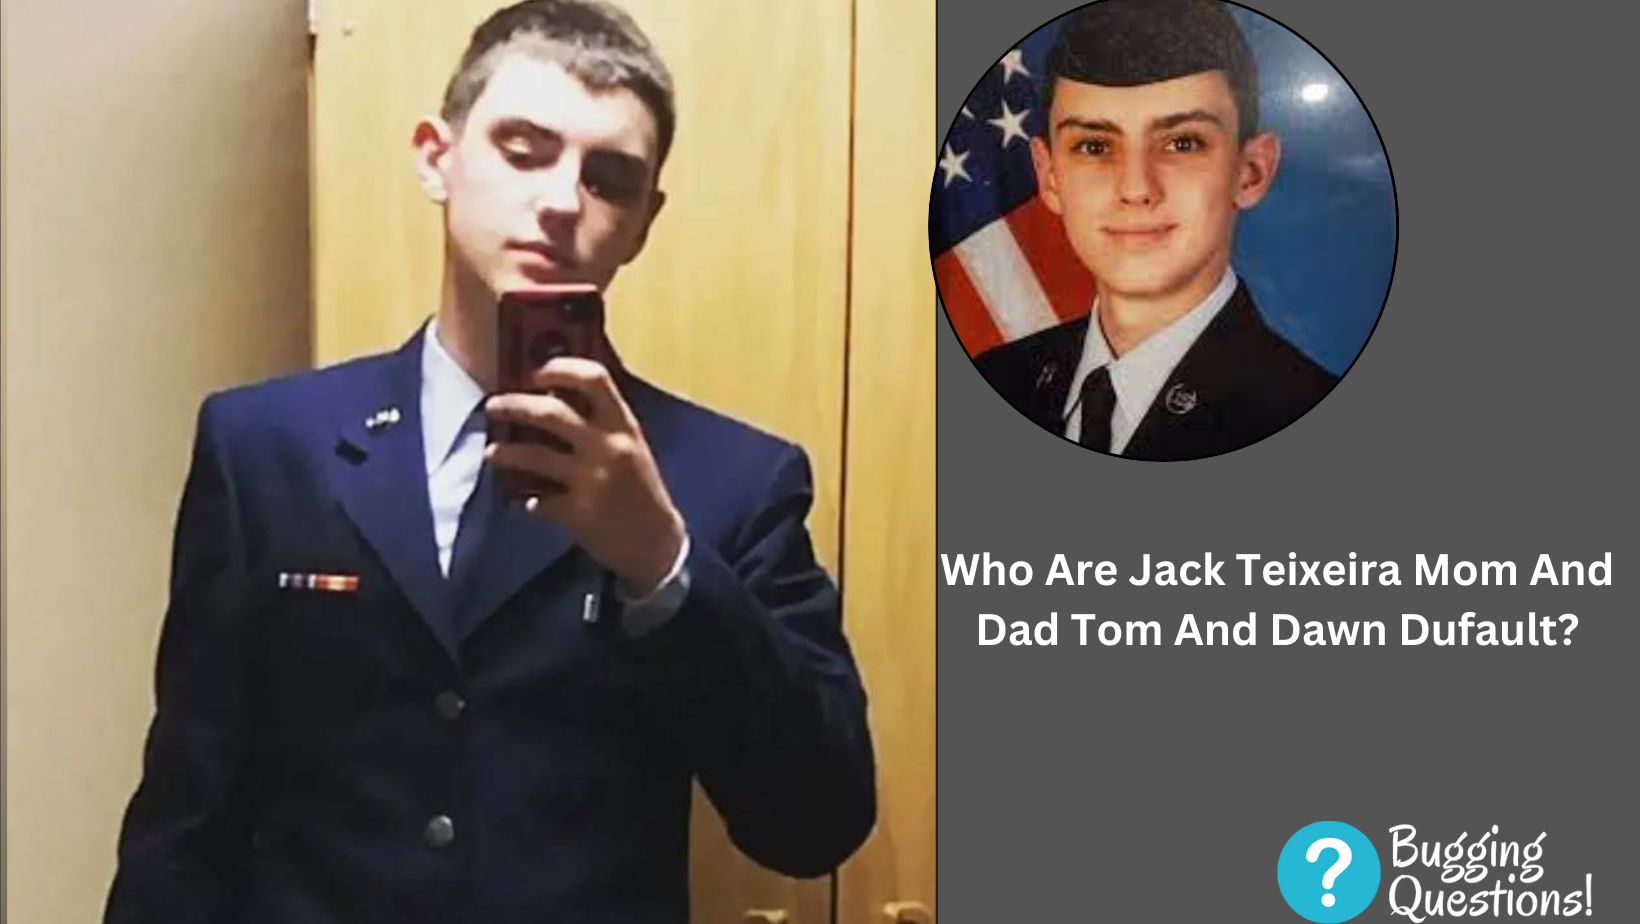 Who Are Jack Teixeira Mom And Dad Tom And Dawn Dufault?